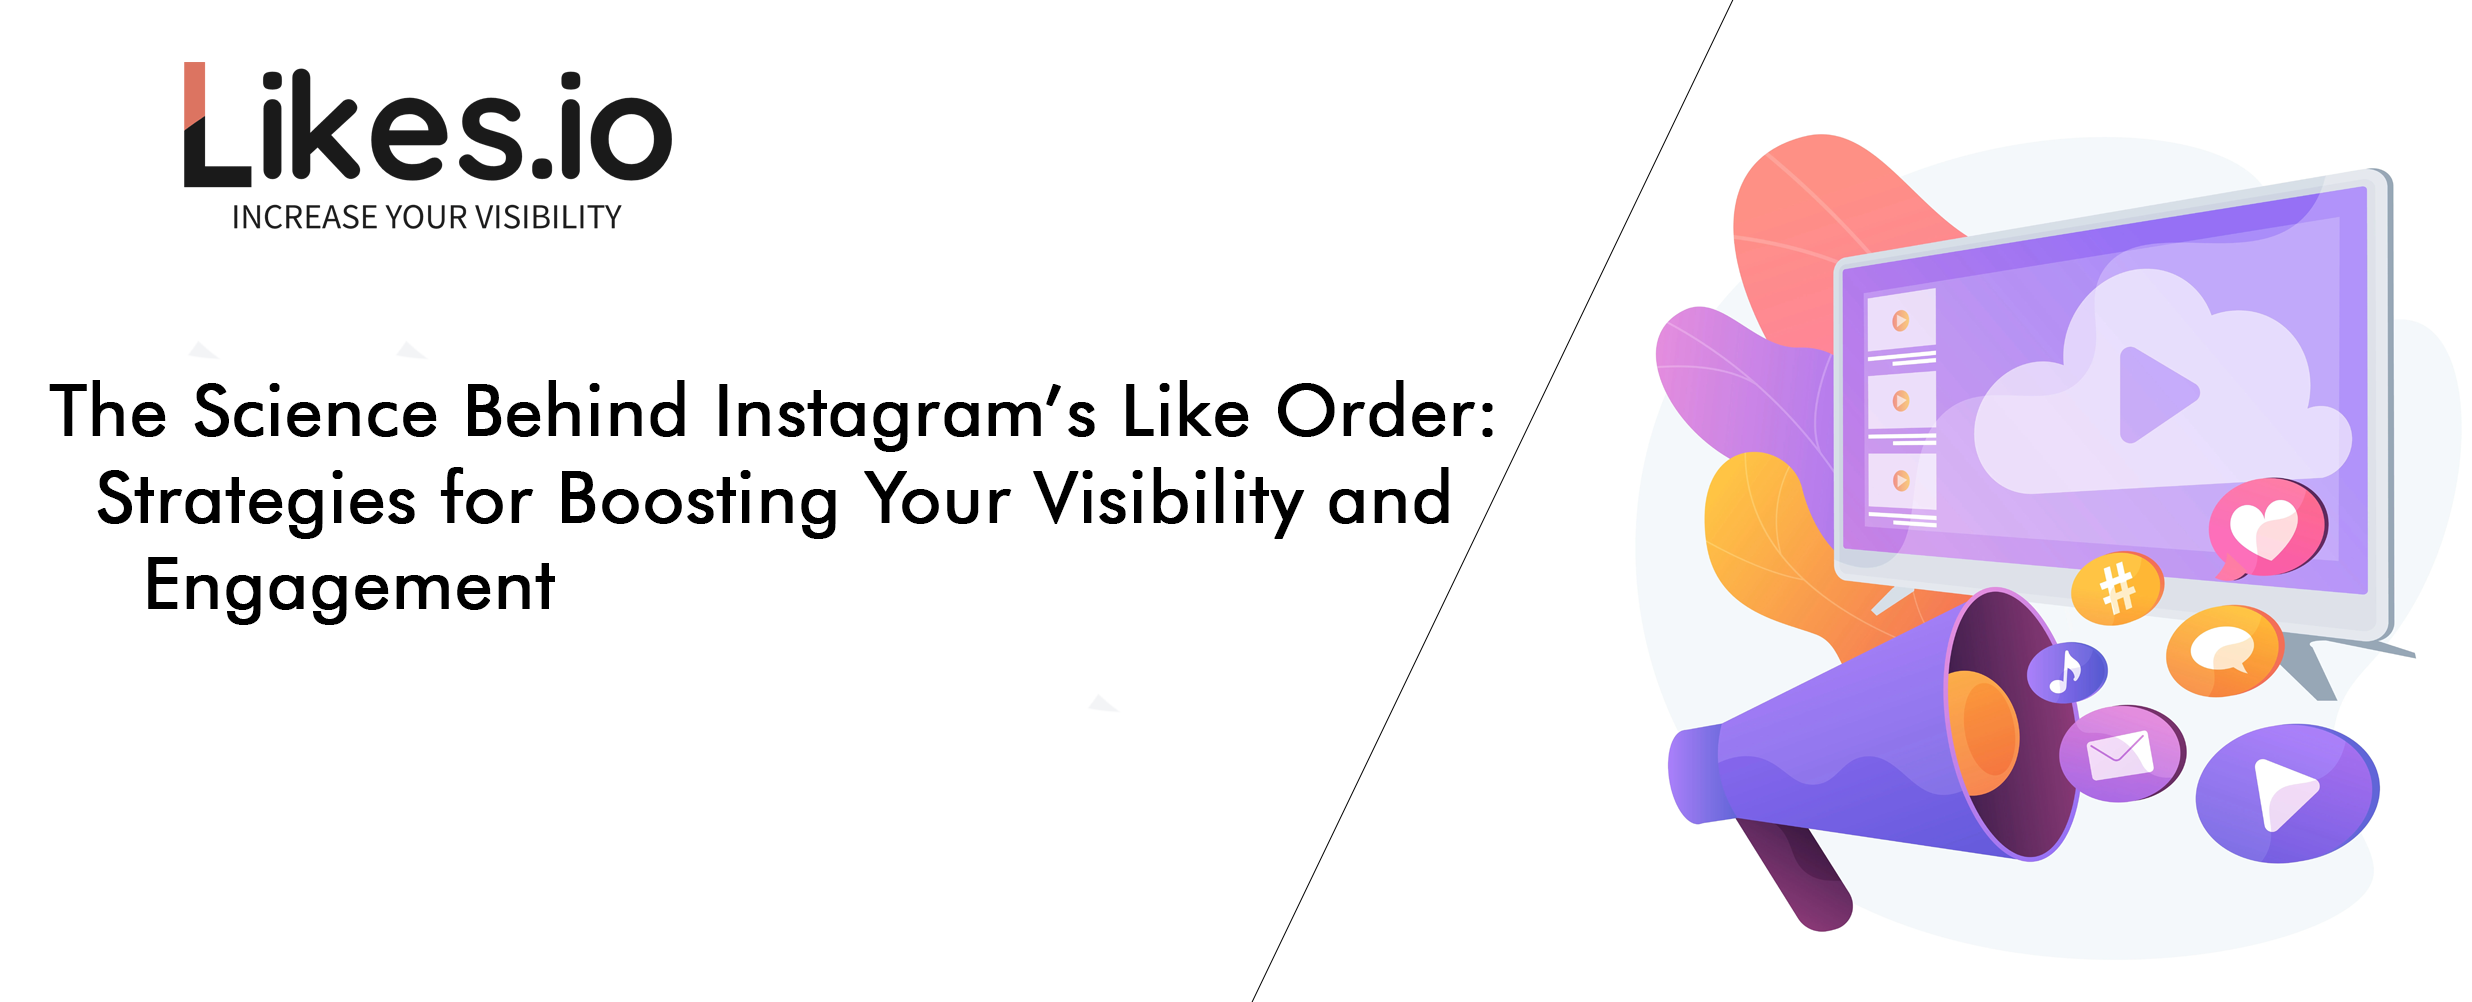 The Science Behind Instagram’s Like Order: Strategies for Boosting Your Visibility and Engagement